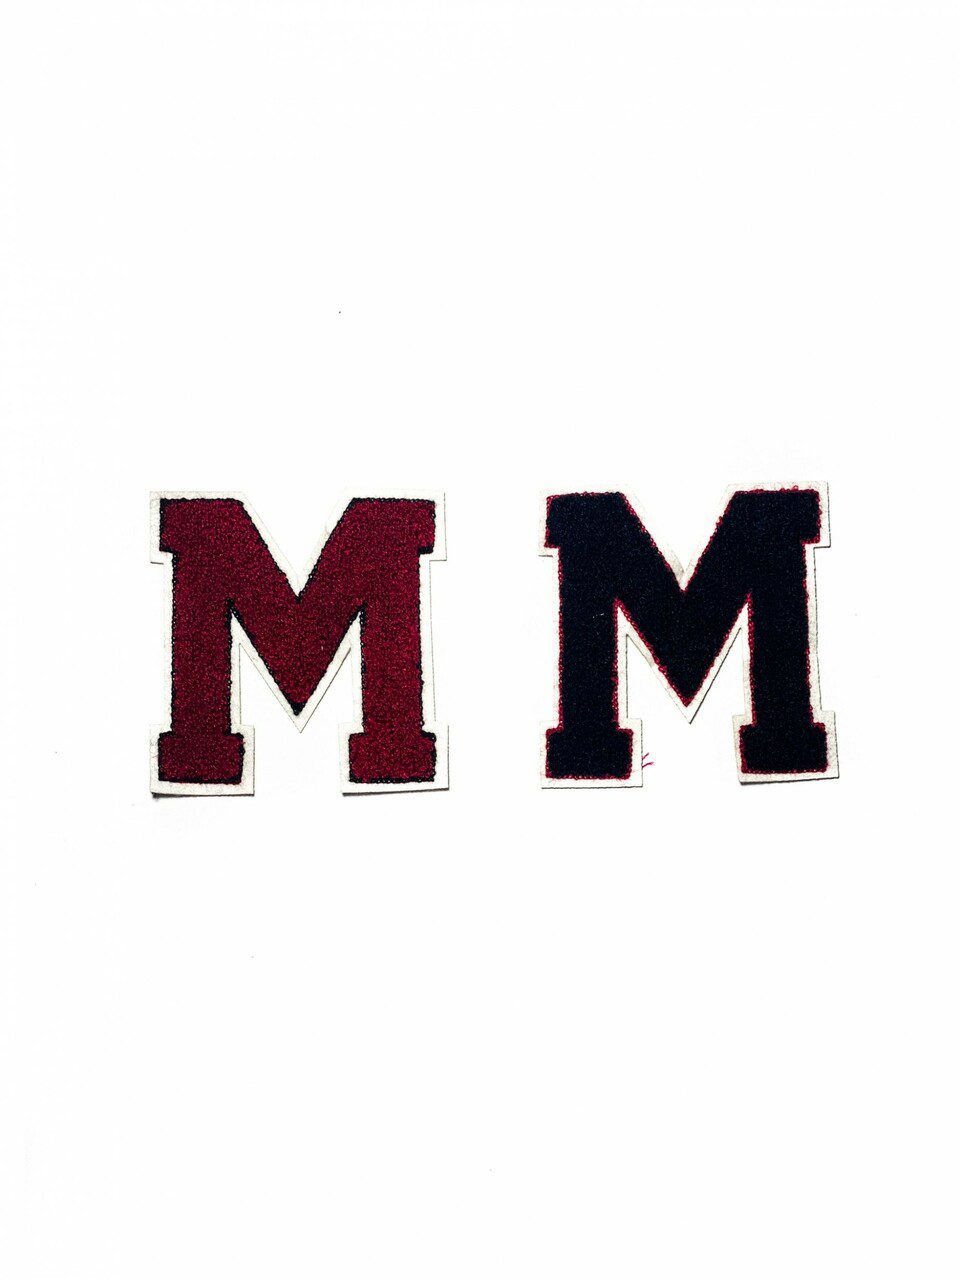 Sew on "M" chenille patch